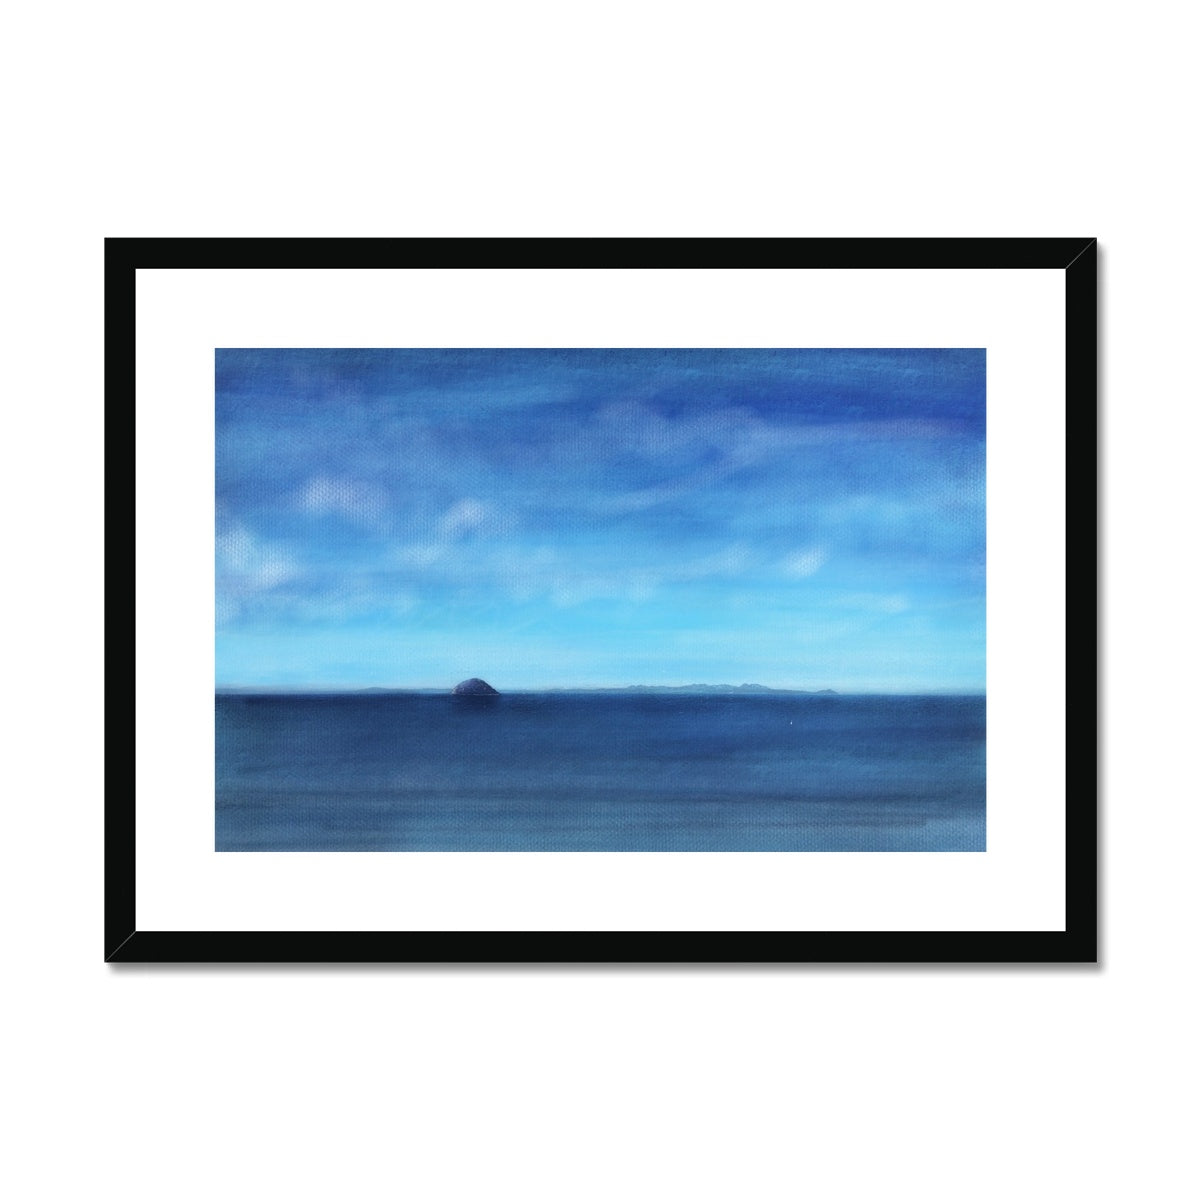 Ailsa Craig & Arran Painting | Framed & Mounted Prints From Scotland-Framed & Mounted Prints-Arran Art Gallery-A2 Landscape-Black Frame-Paintings, Prints, Homeware, Art Gifts From Scotland By Scottish Artist Kevin Hunter